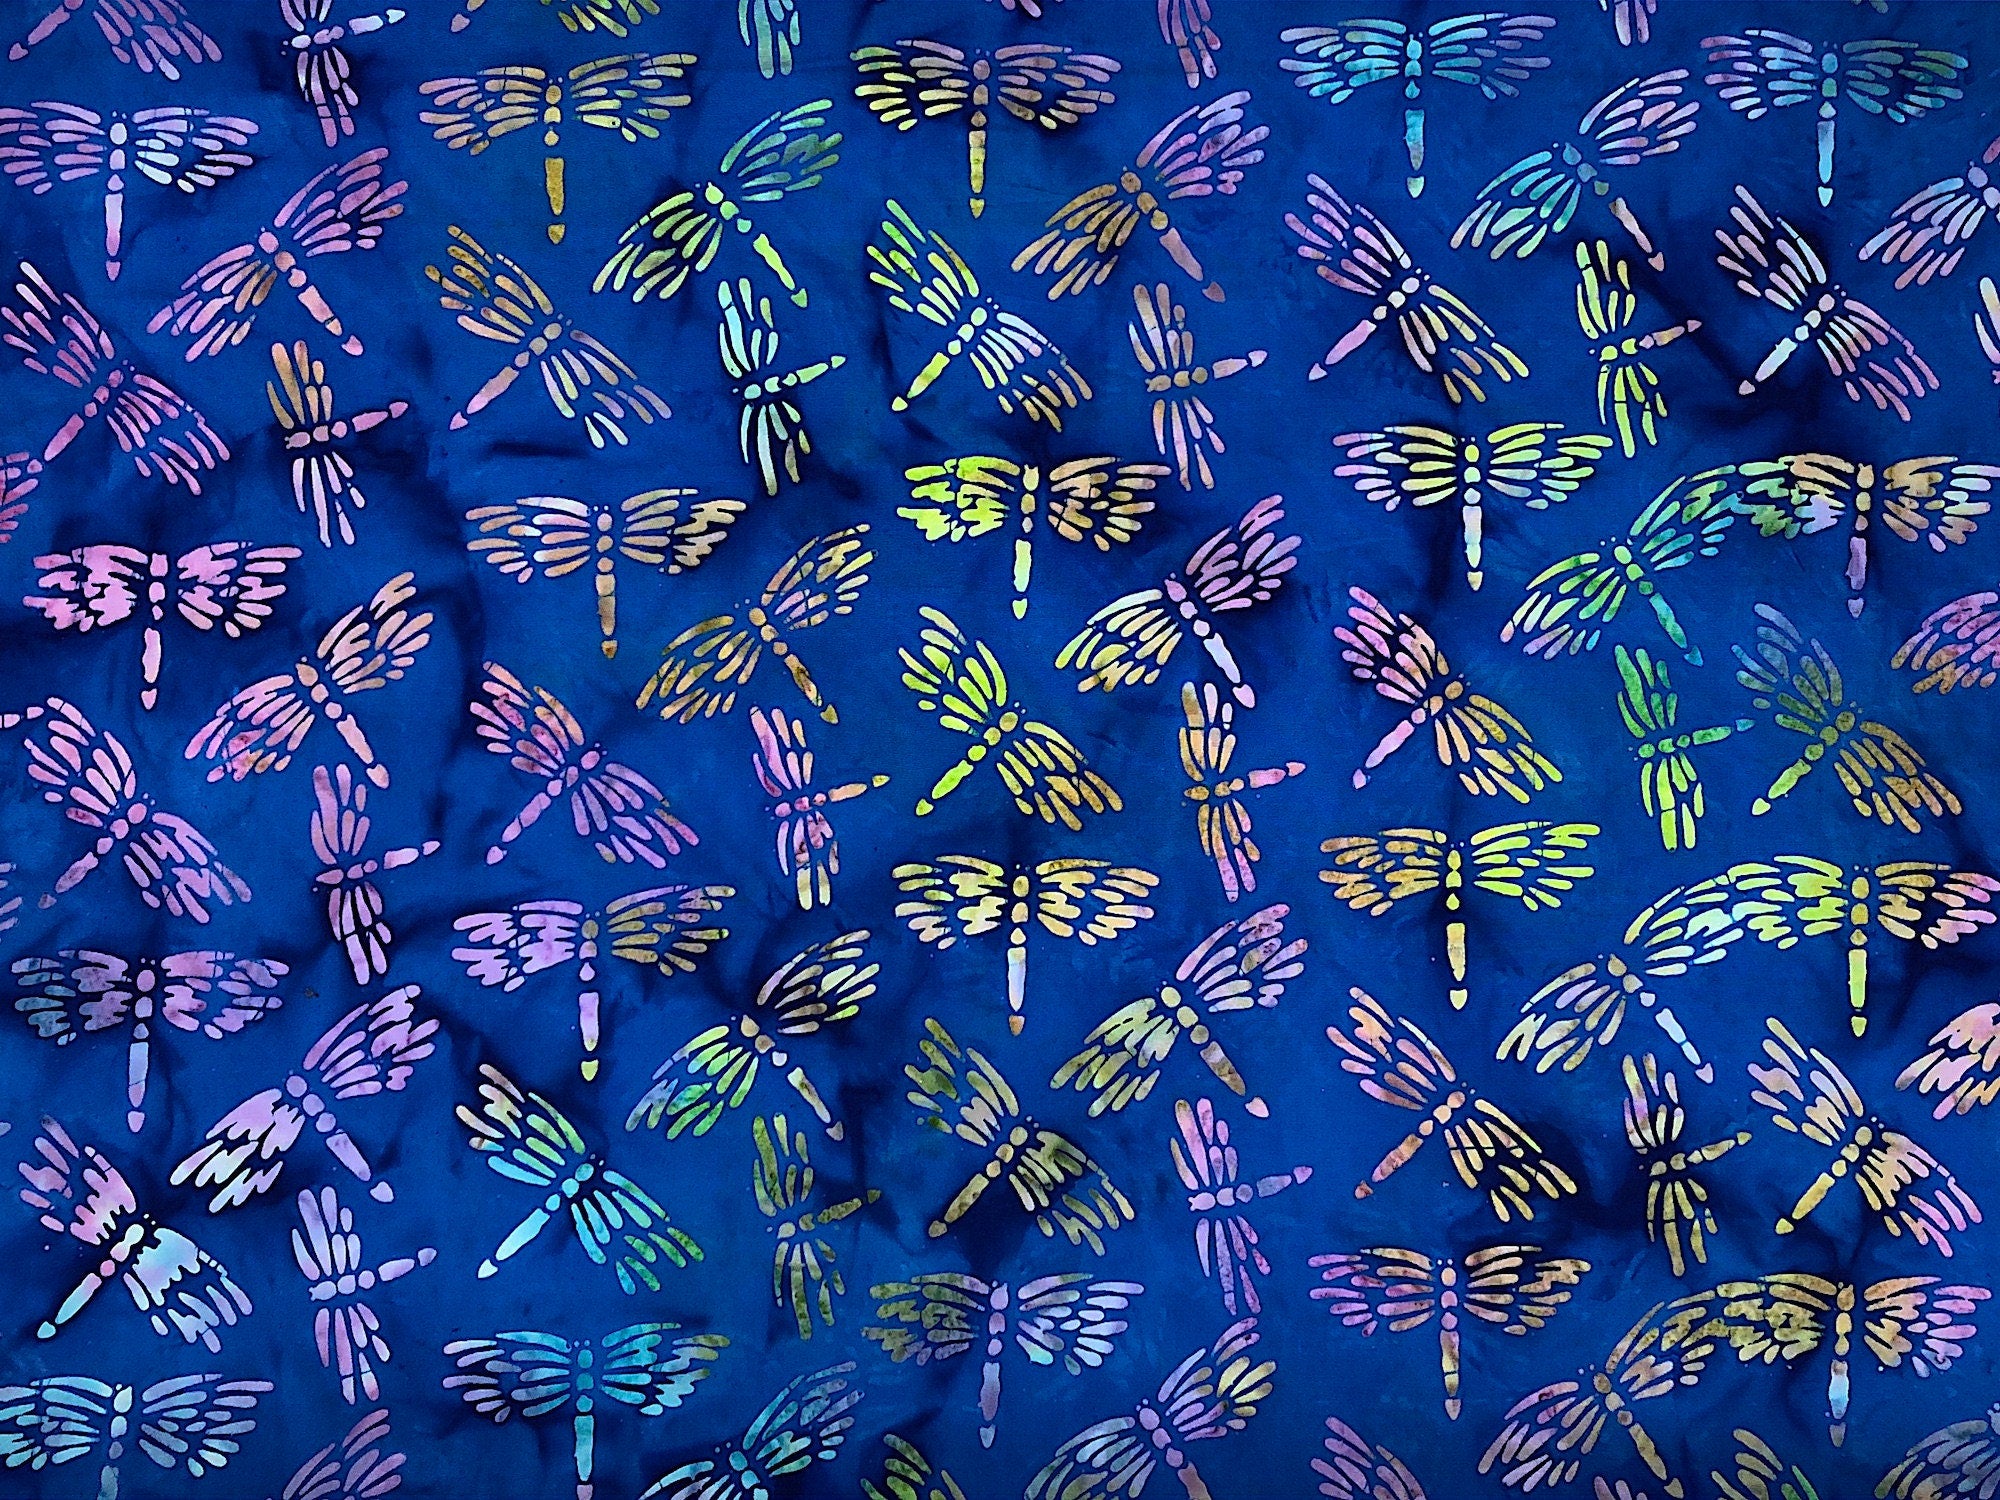 This dragonfly fabric is part of the lemon grass collection by Island Batik. The dragonflies are a combination of yellow, pink, blue and green. This fabric is called Dragonfly Royal Blue